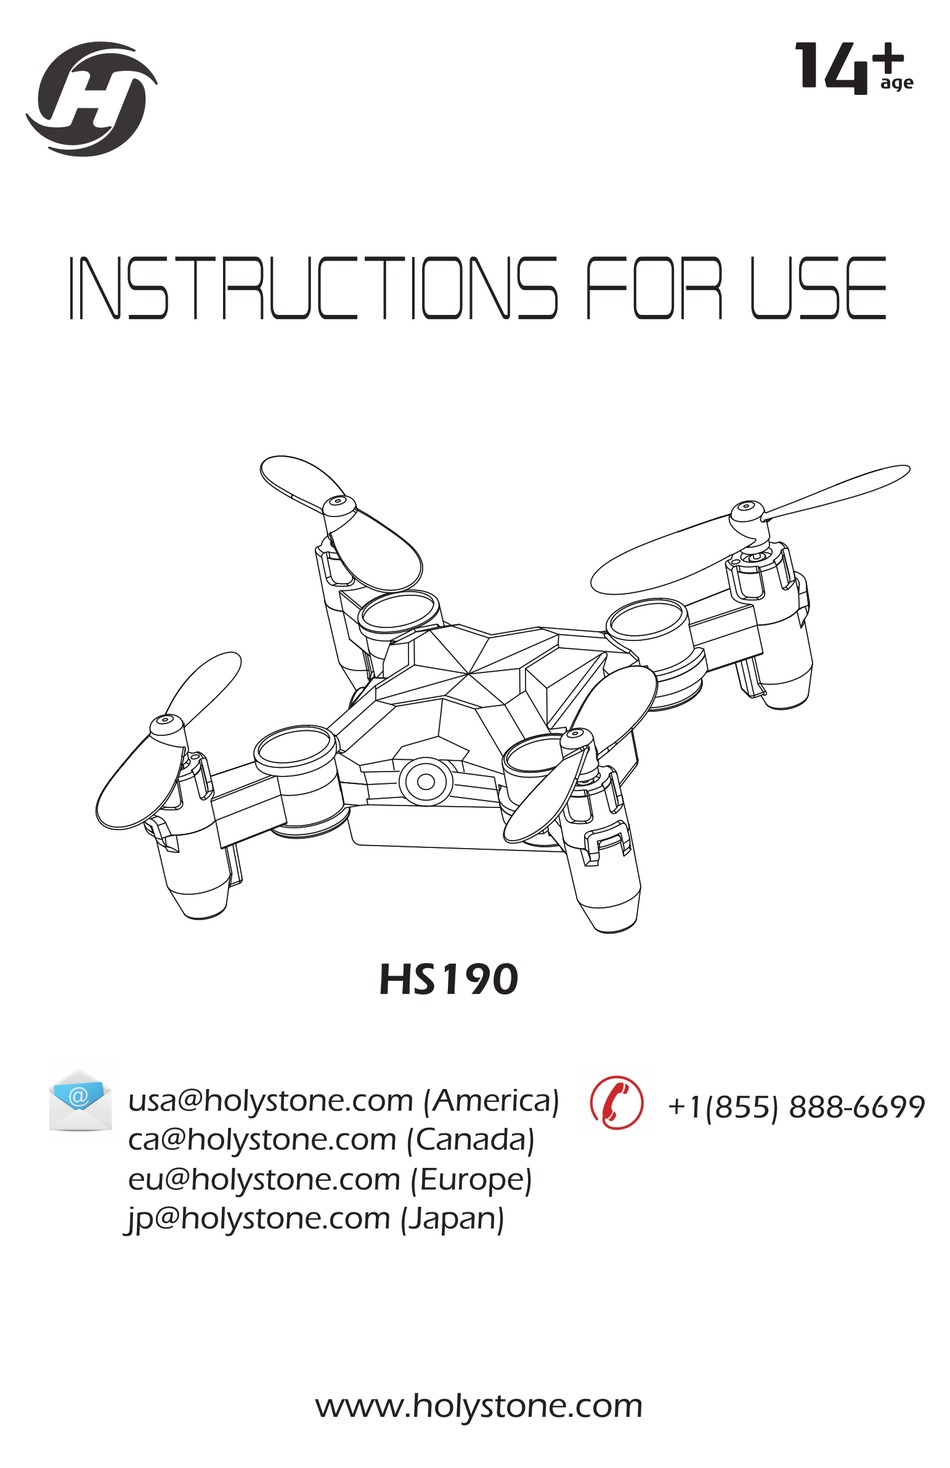 Holy Stone Drone Hs720 Manual - Picture Of Drone